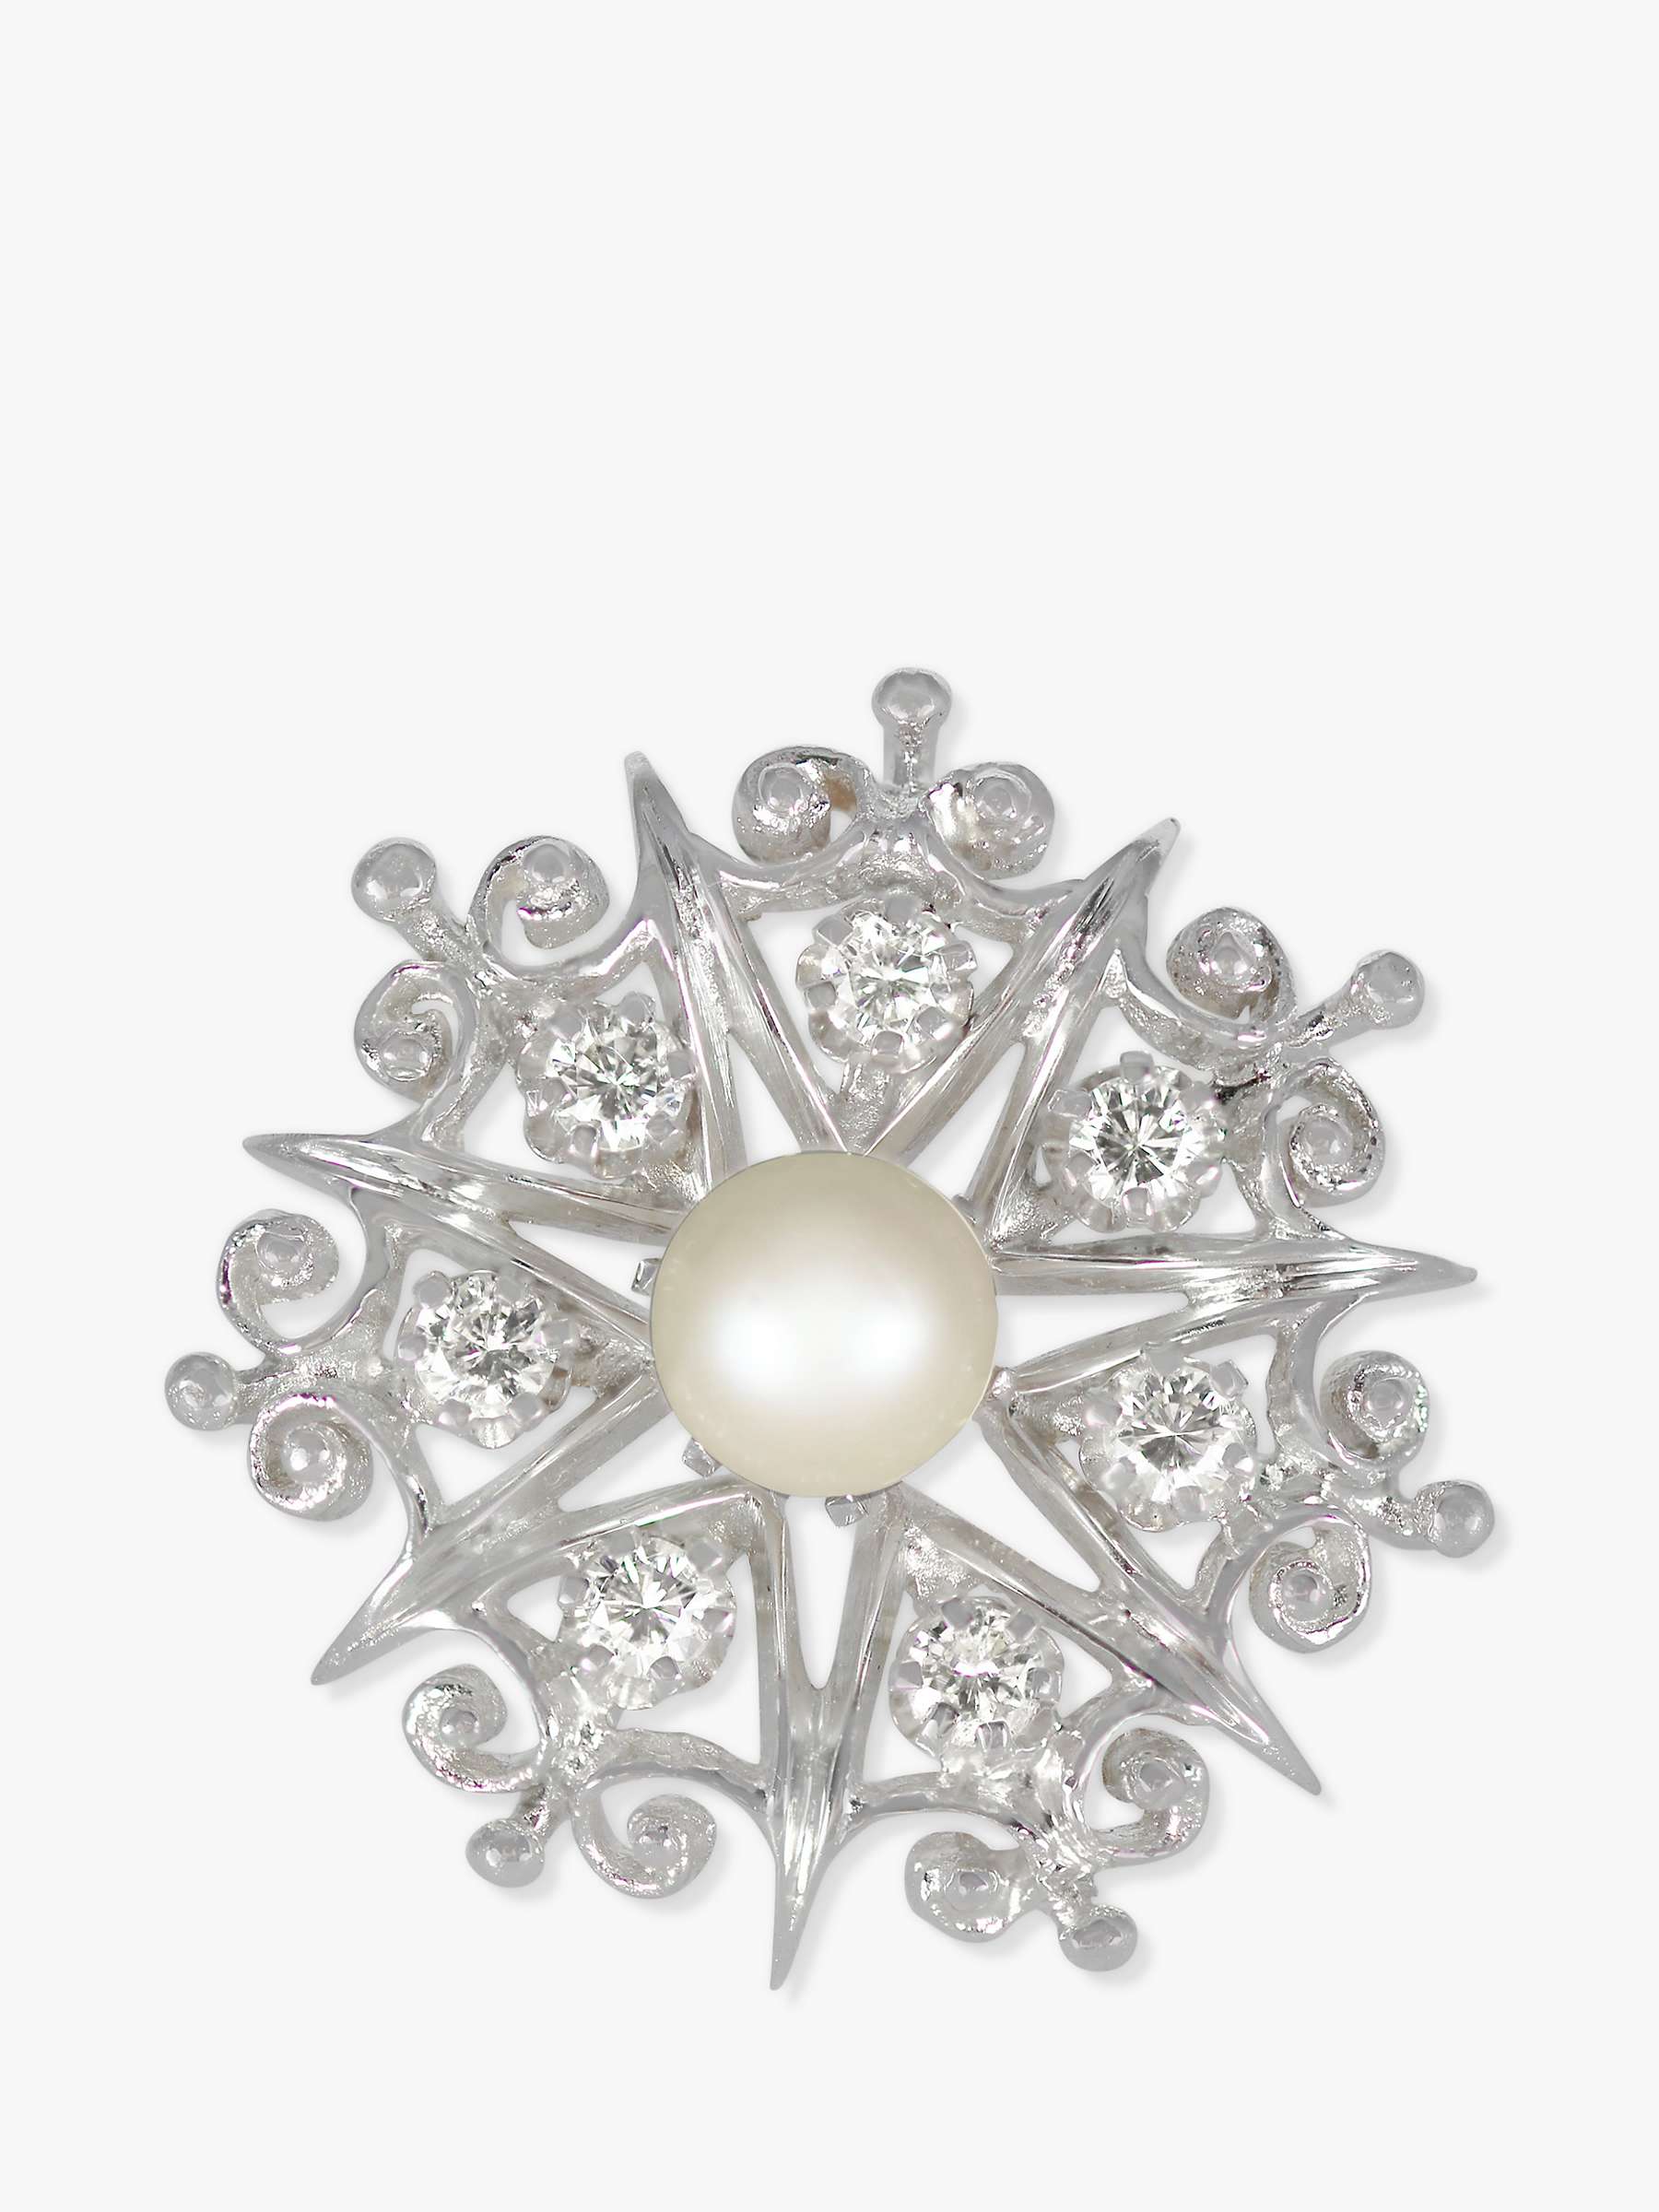 Buy Kojis 14ct White Gold Diamond and Pearl Second Hand Brooch Online at johnlewis.com